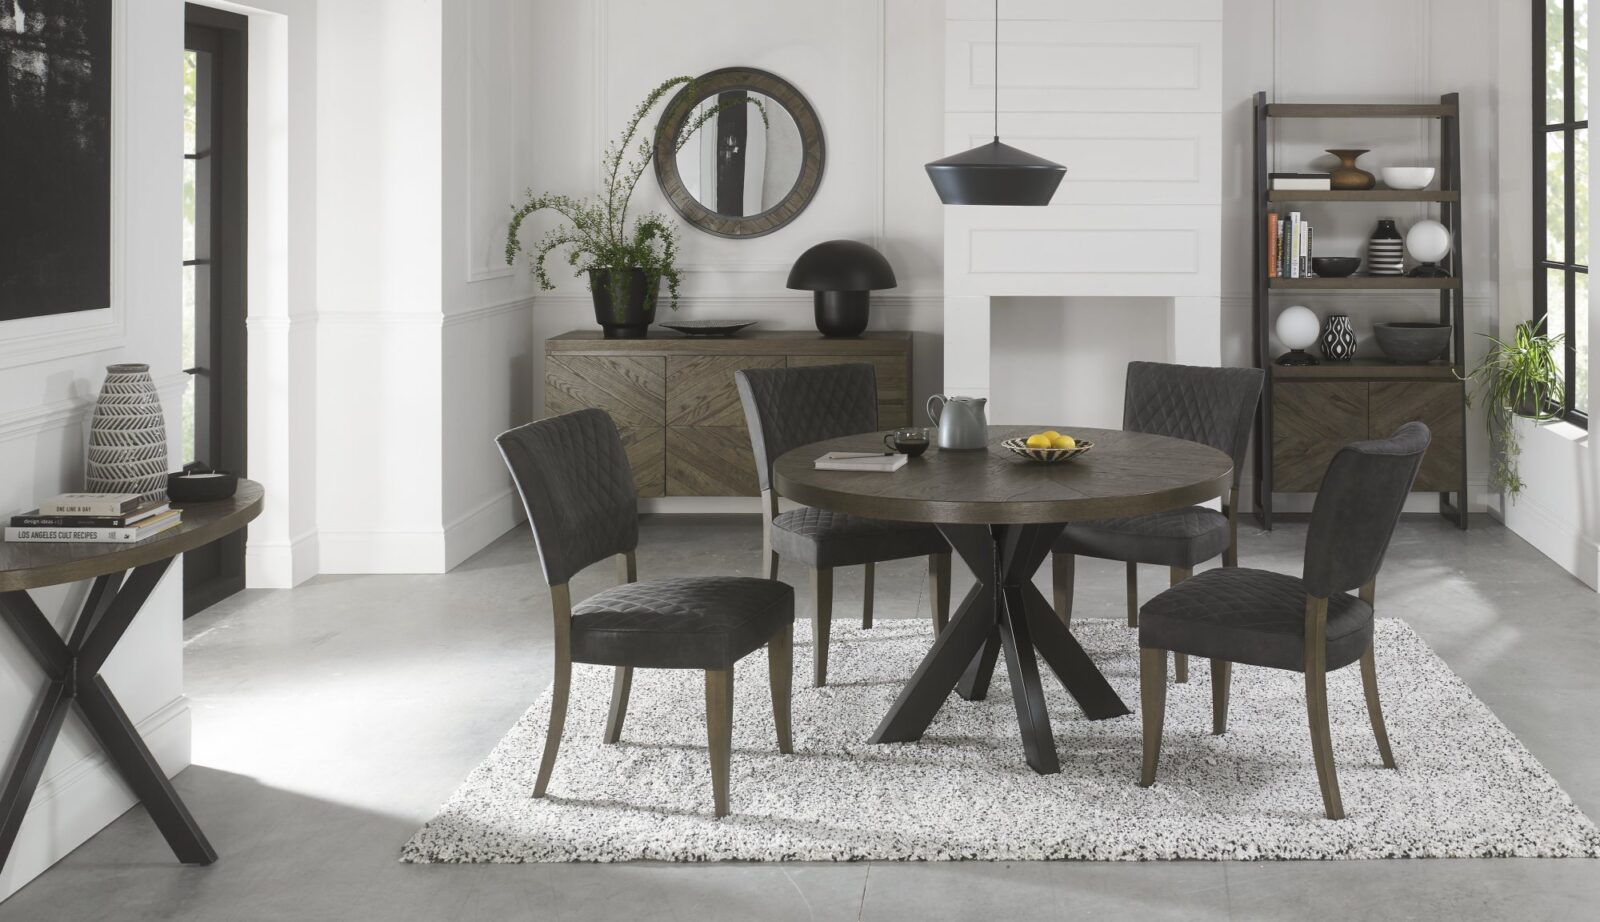 Fixed round table by Skraut Home